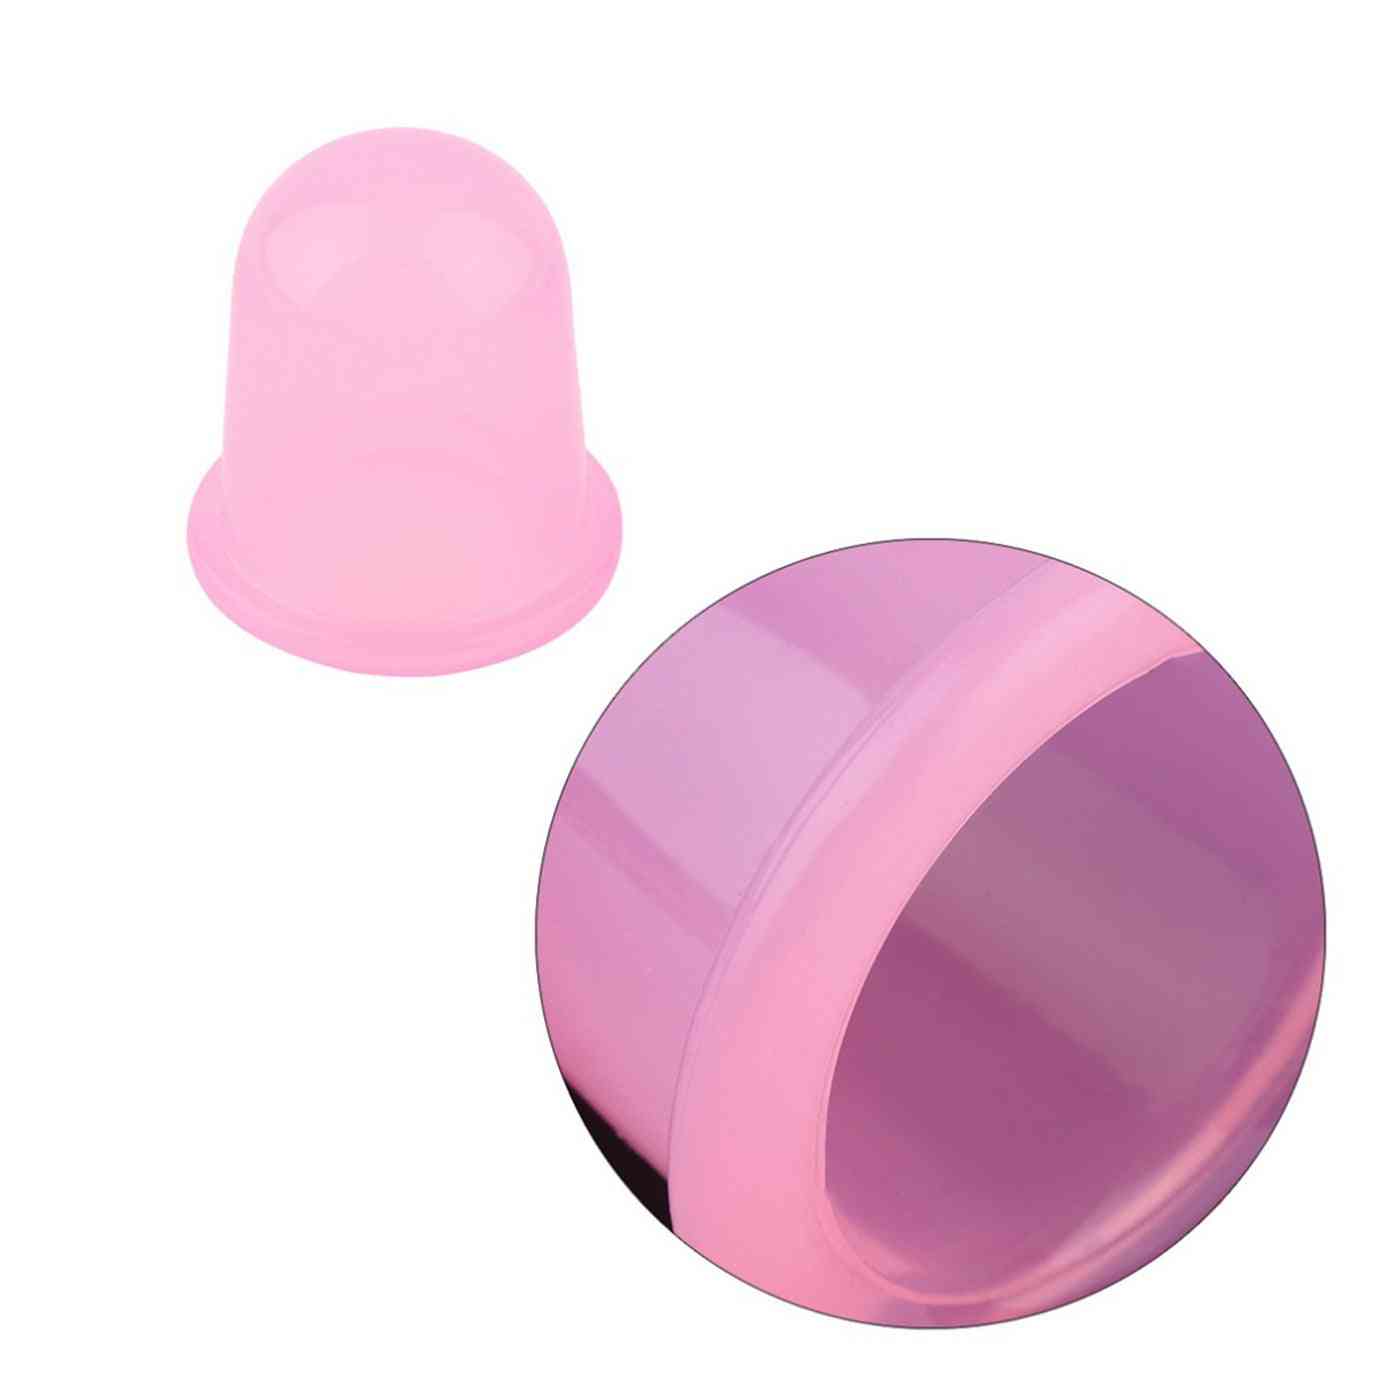 Silicone Vacuum Cup Suction Cups - Massage, Body, Face, Neck, Cellulite